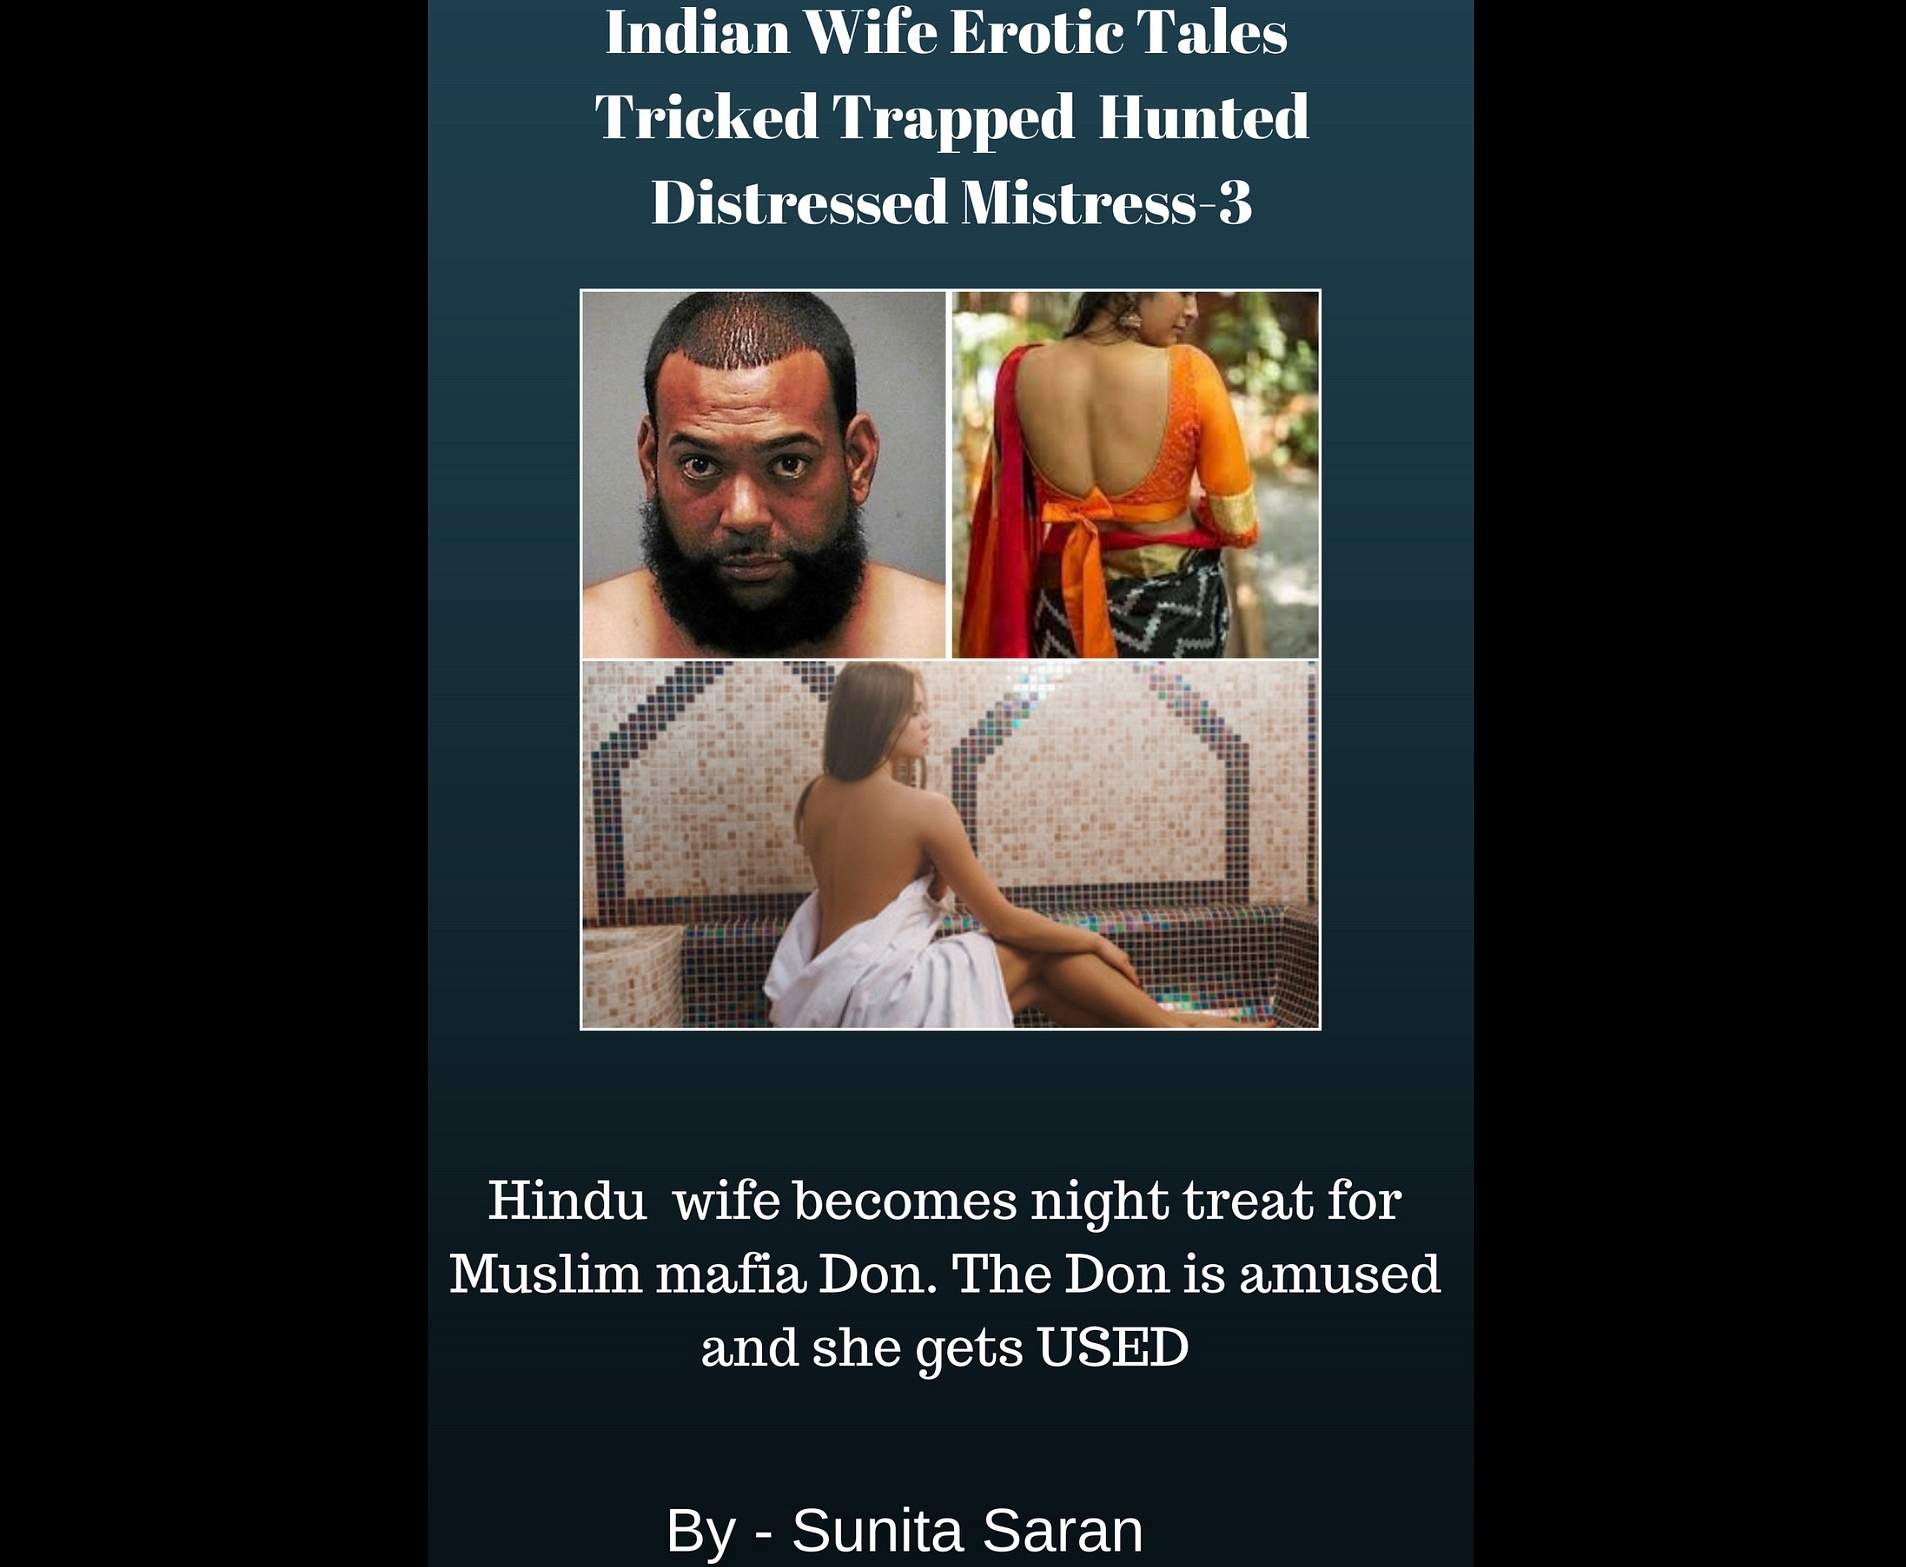 Indian Interfaith Sex Videos - On Kindle Store, A Sea Of Pornographic And Rape Fantasy Books Featuring  Hindu Women And Muslim Men